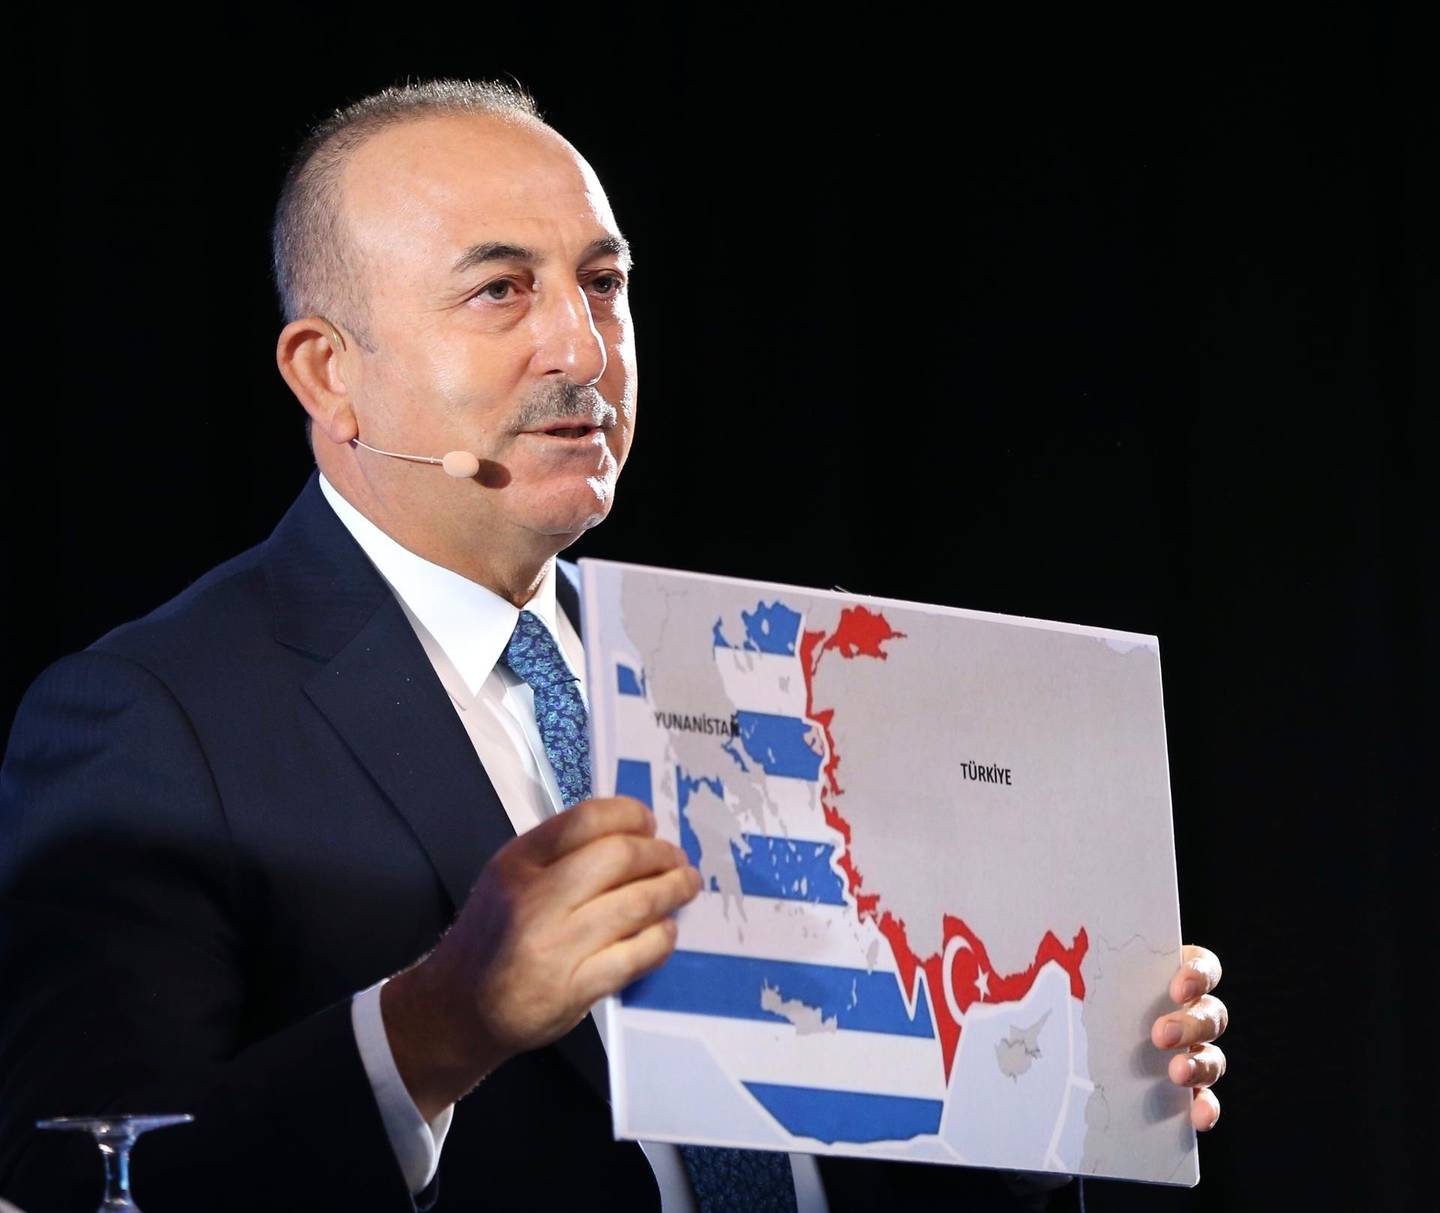 Turkey's Foreign Minister Mevlut Cavusoglu, shows a map of Greece and Turkey as he speaks during a conference in Bratislava, Slovakia, Thursday, Oct. 8, 2020. Cavusoglou met with Greek Foreign Minister Nikos Dendias on the sidelines of the conference and Greek and Turkish officials say the ministers agreed to set a date for the start of a new round of exploratory talks between the two. A dispute between the two NATO allies and longtime rivals over maritime boundaries in the eastern Mediterranean this summer led to fears of open conflict as warships from both sides faced off. (Fatih Aktas/Turkish Foreign Ministry via AP, Pool)